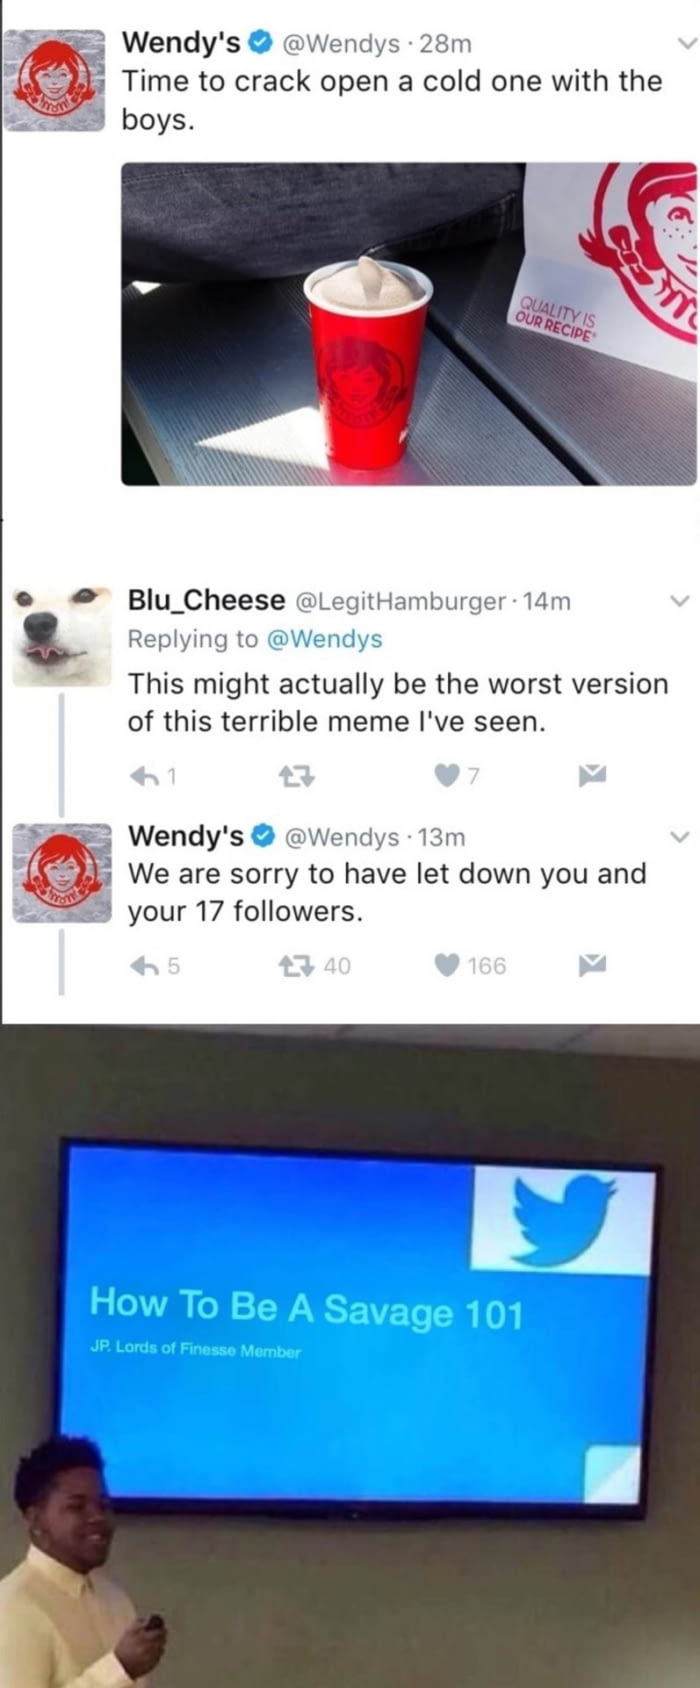 Wendy's laying it down proper.